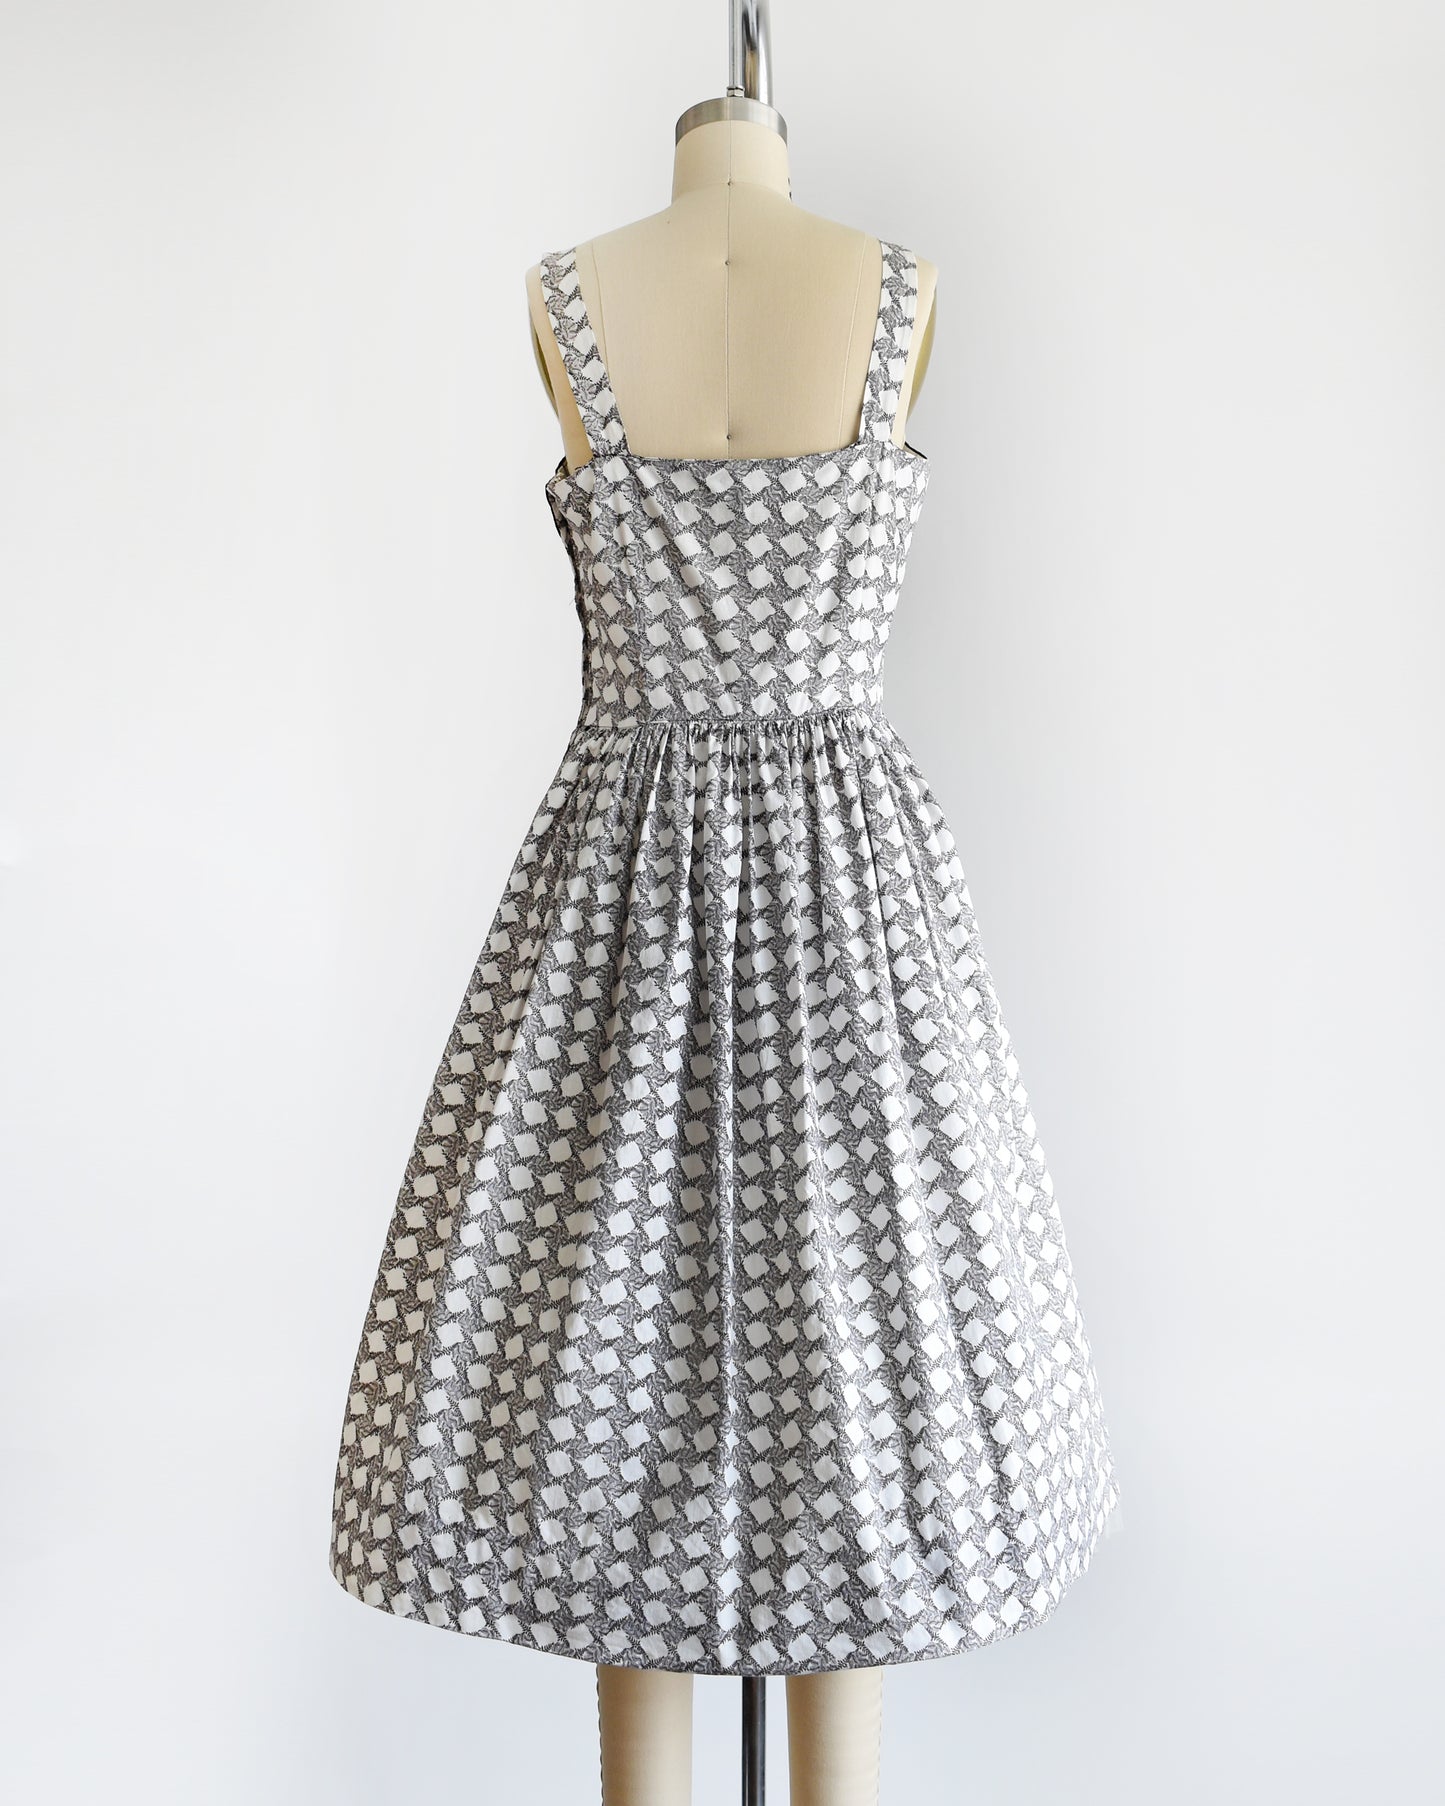 Back view of a vintage 1950s white dress with a  black fern motif that forms a diamond print. The dress has a black scalloped neckline and fit and flare skirt.